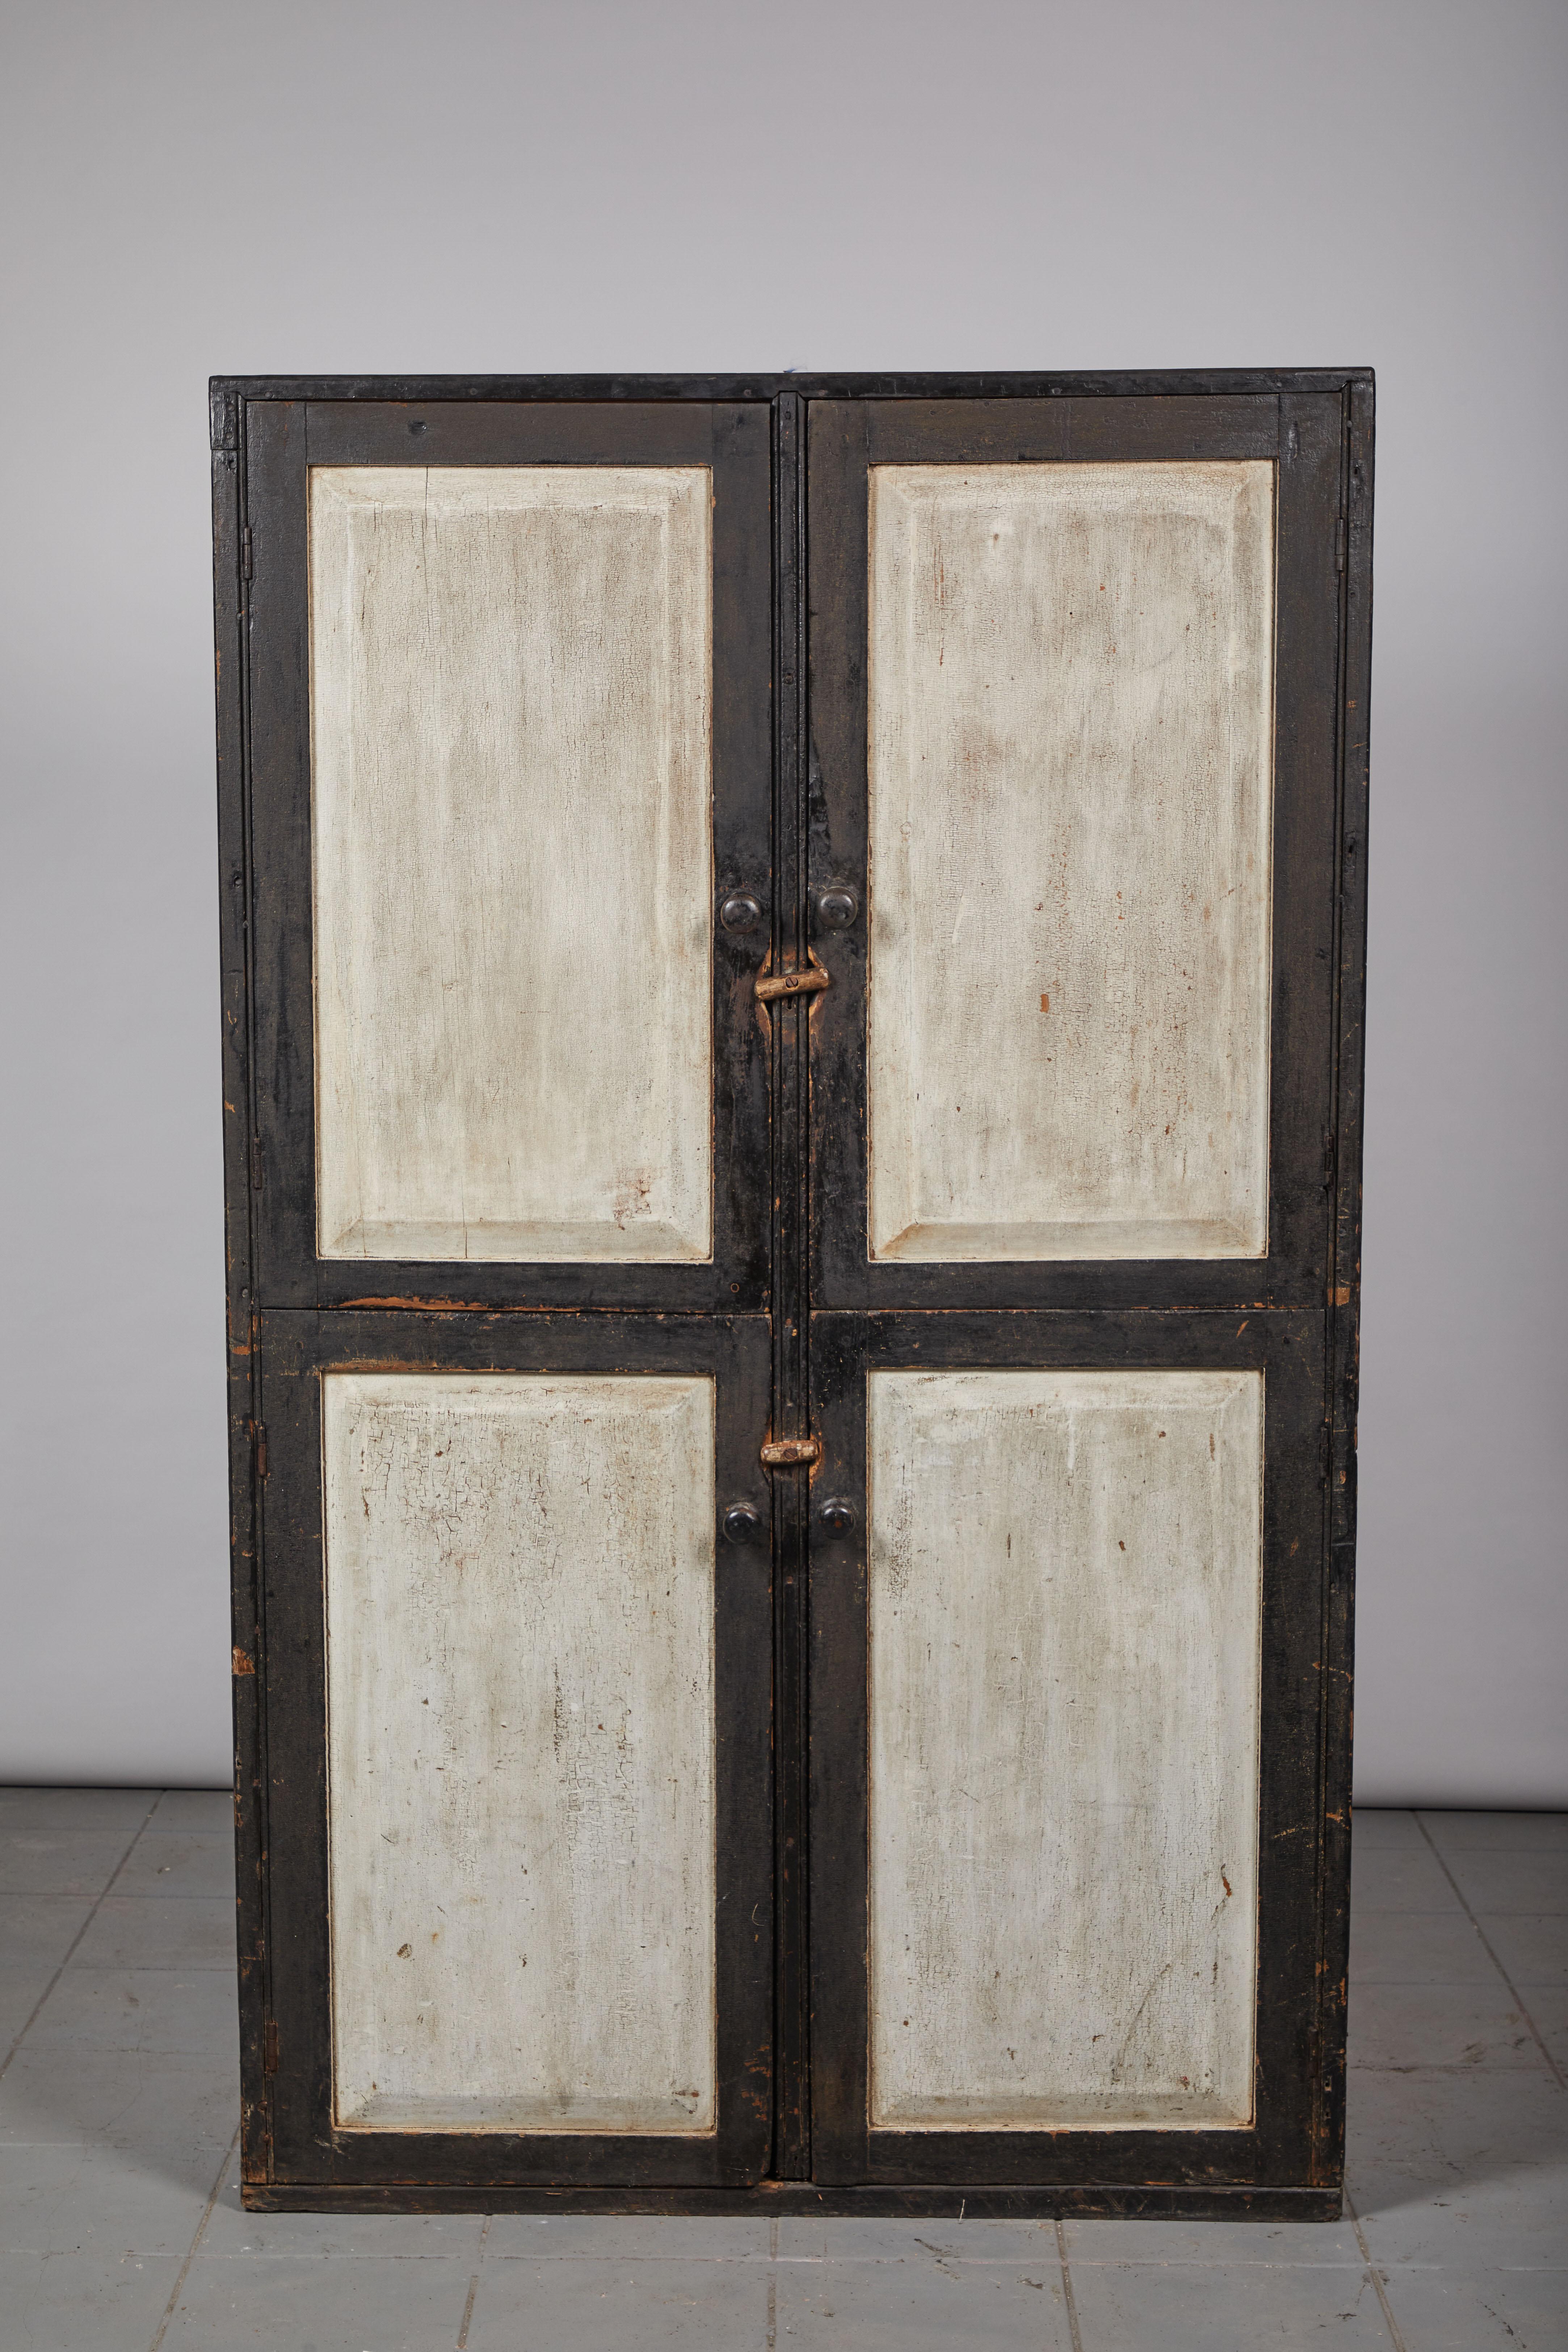 Early American rustic black and white four-door cabinet hutch beautifully hand painted with toggle locks.